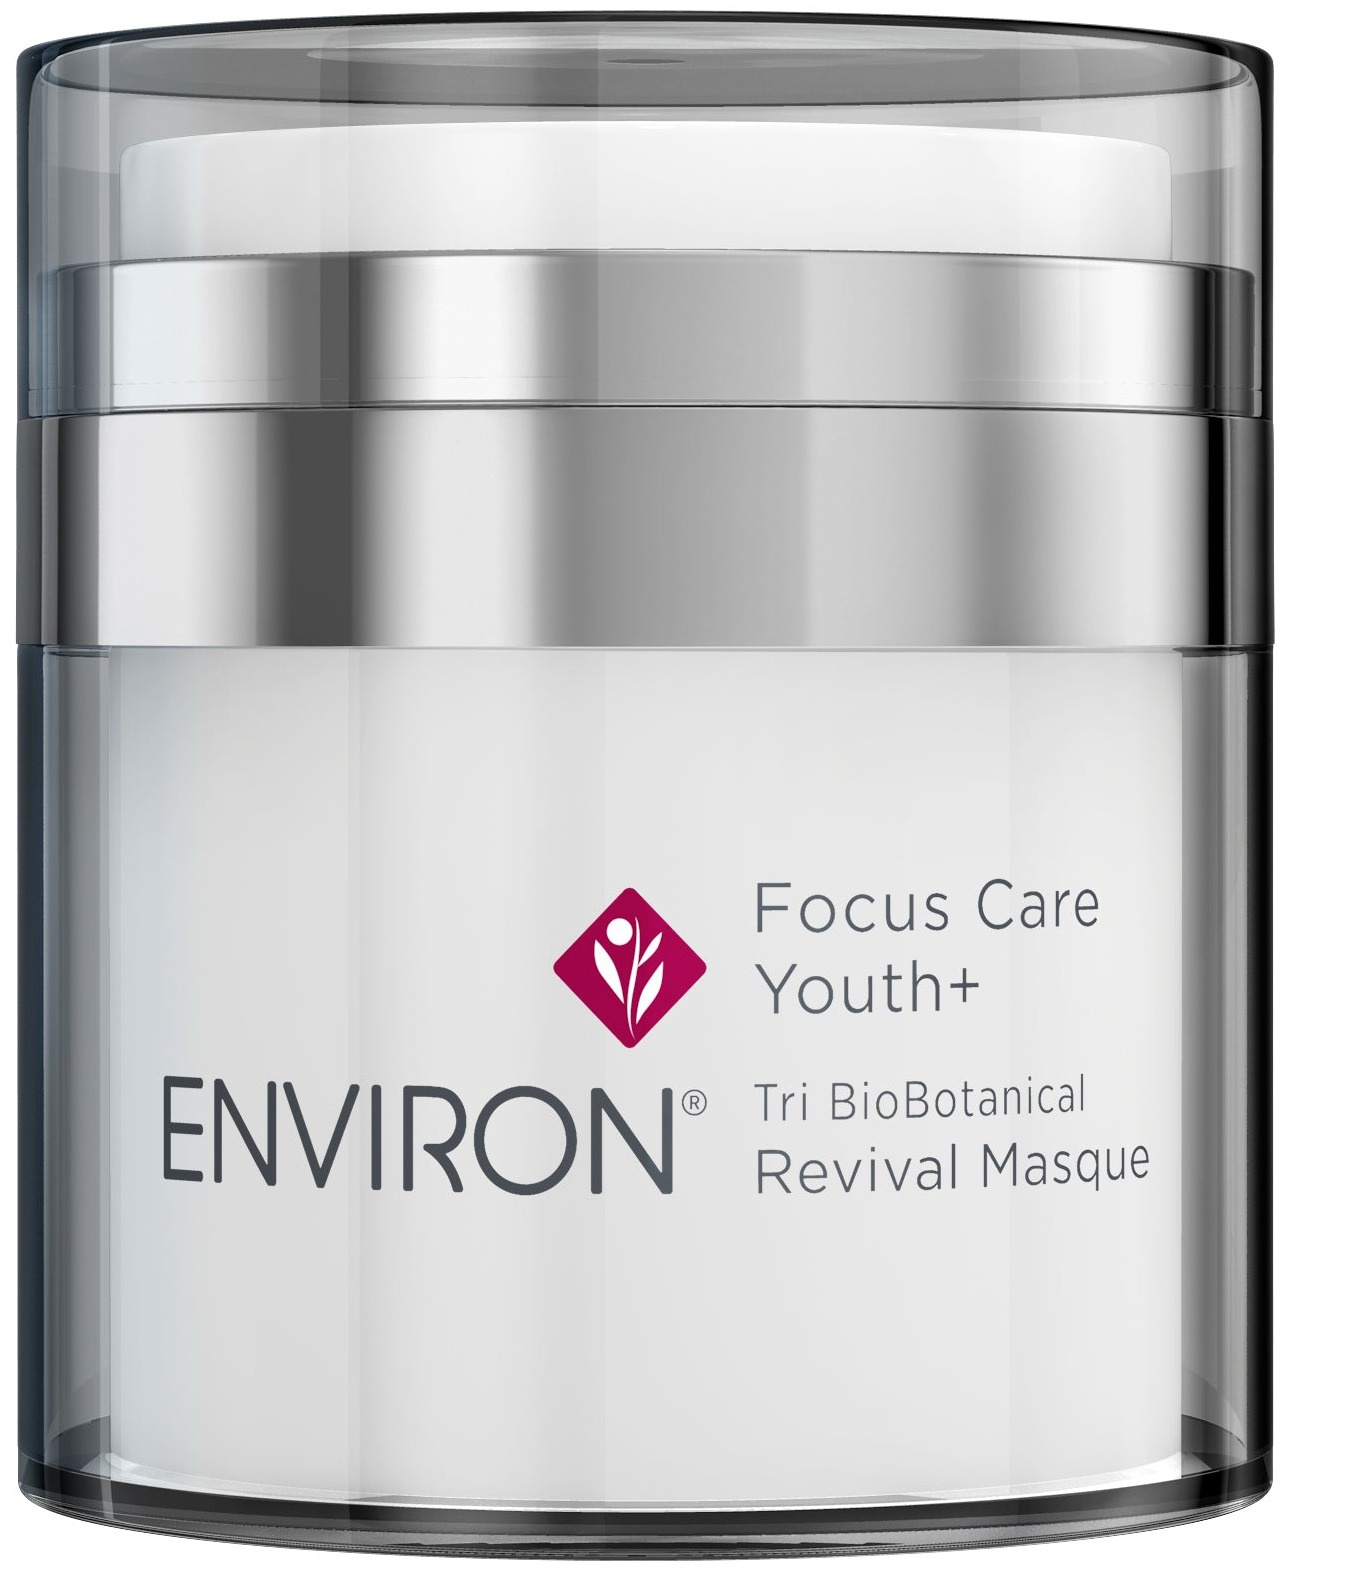 Environ Focus Care Youth+ Tribiobotanical Revival Masque ingredients